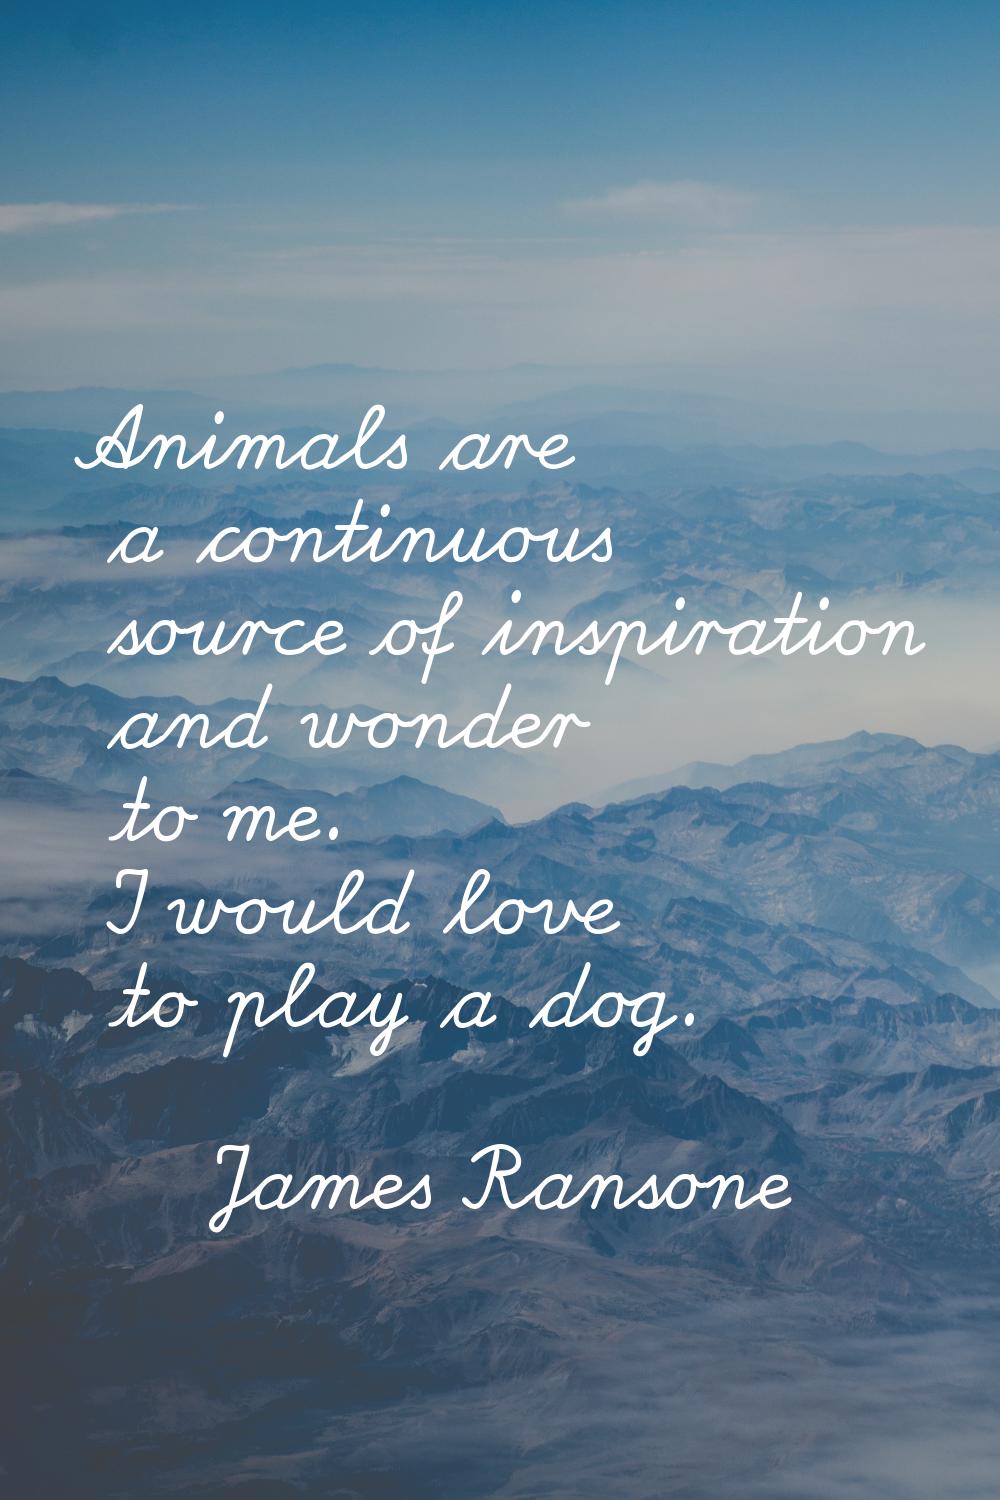 Animals are a continuous source of inspiration and wonder to me. I would love to play a dog.